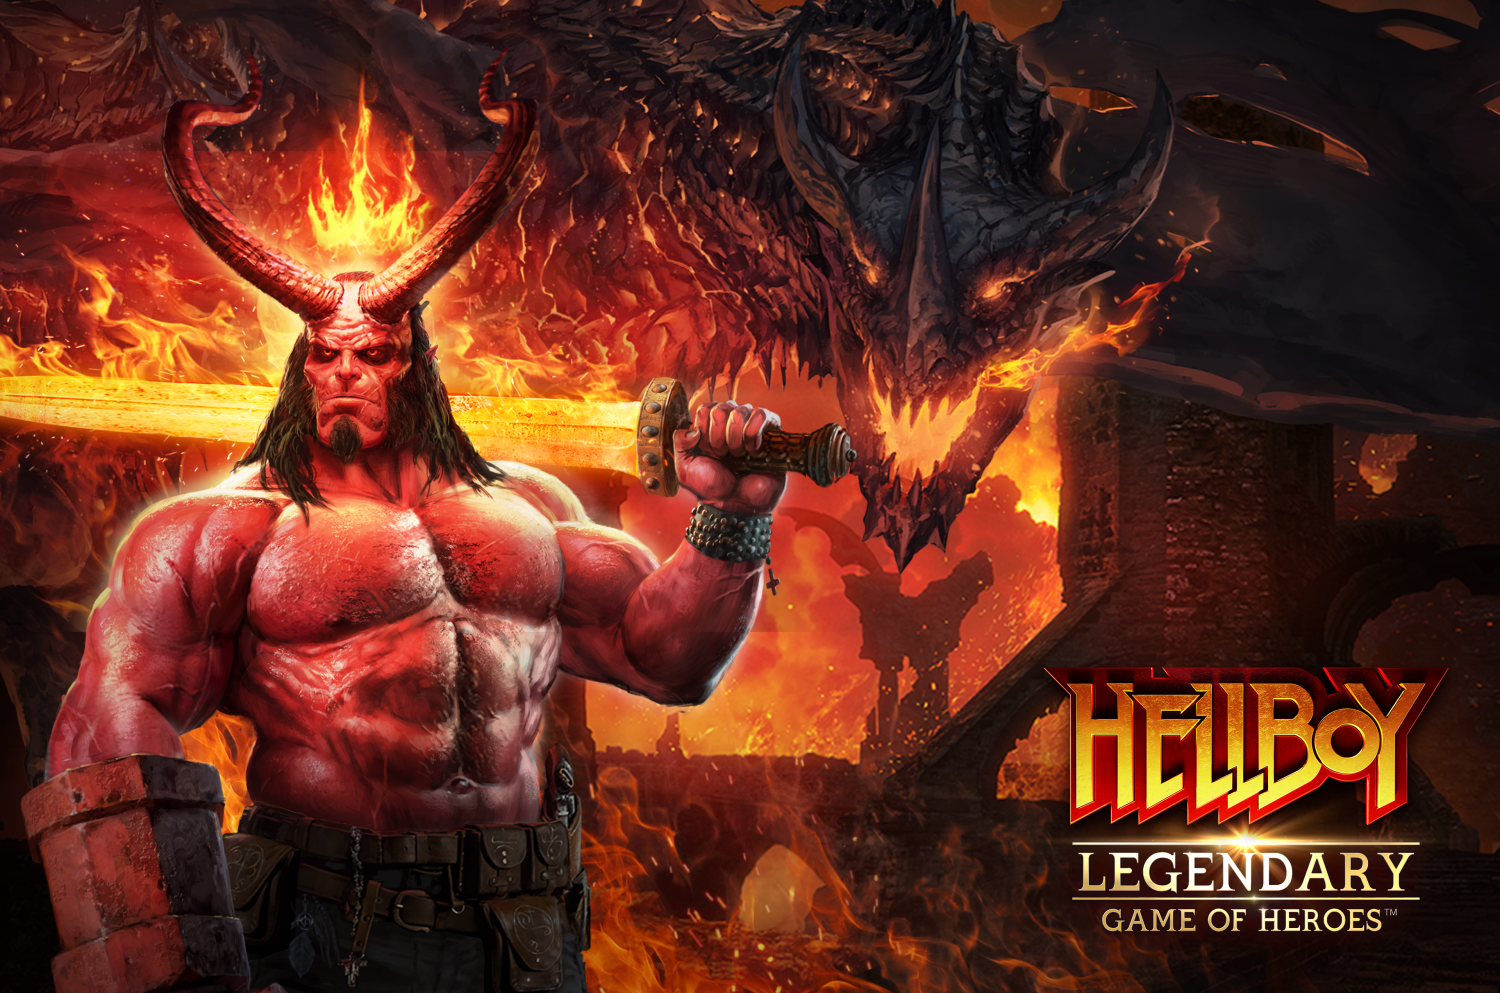 Hellboy comes to Legendary: Game Of Heroes this April